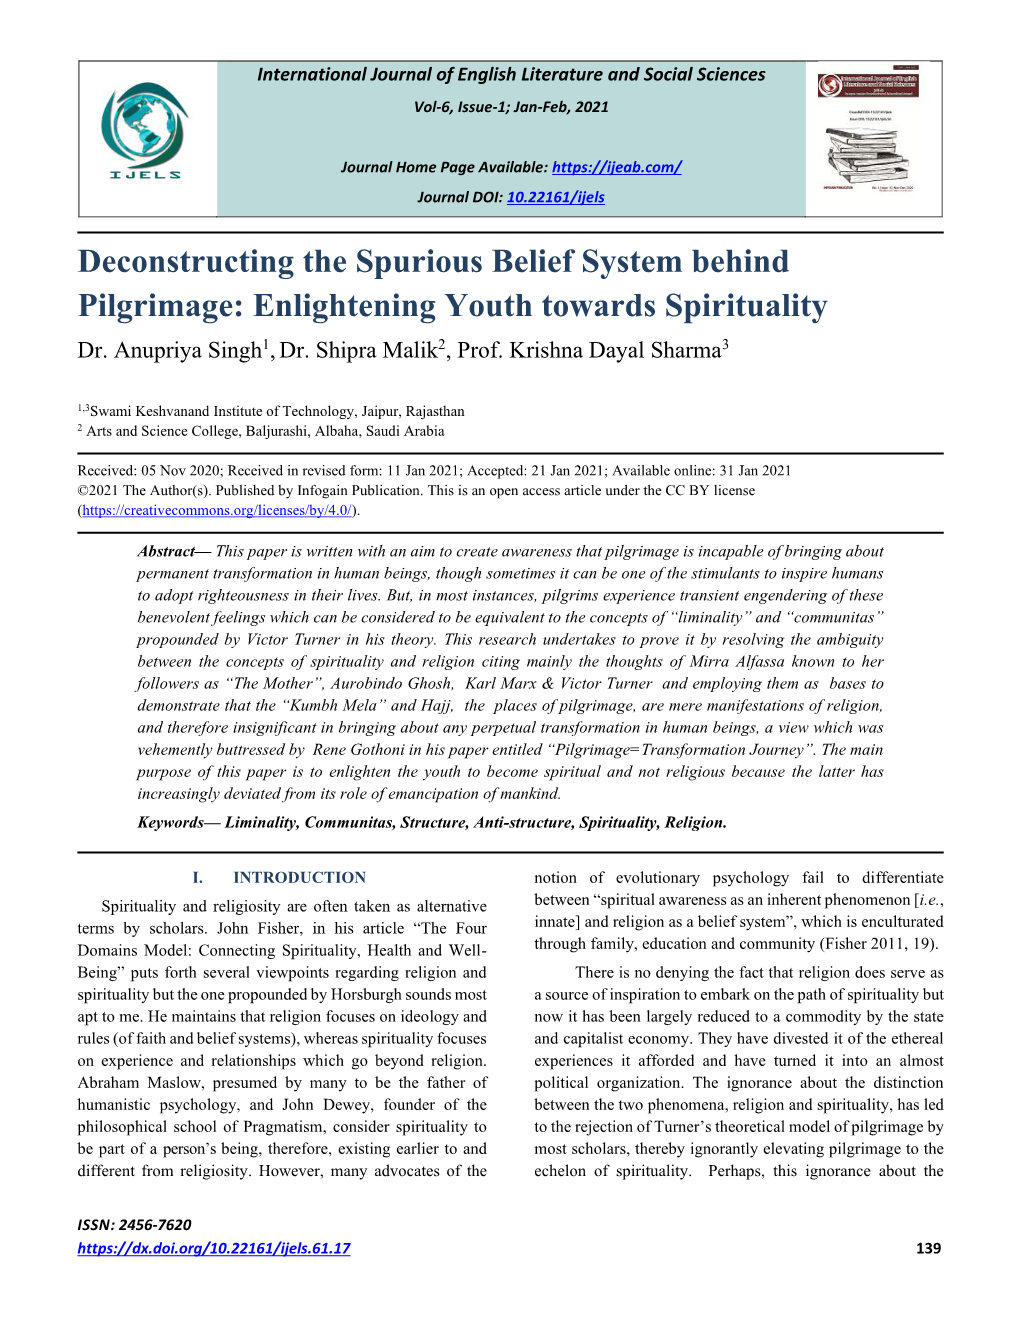 Deconstructing the Spurious Belief System Behind Pilgrimage: Enlightening Youth Towards Spirituality Dr